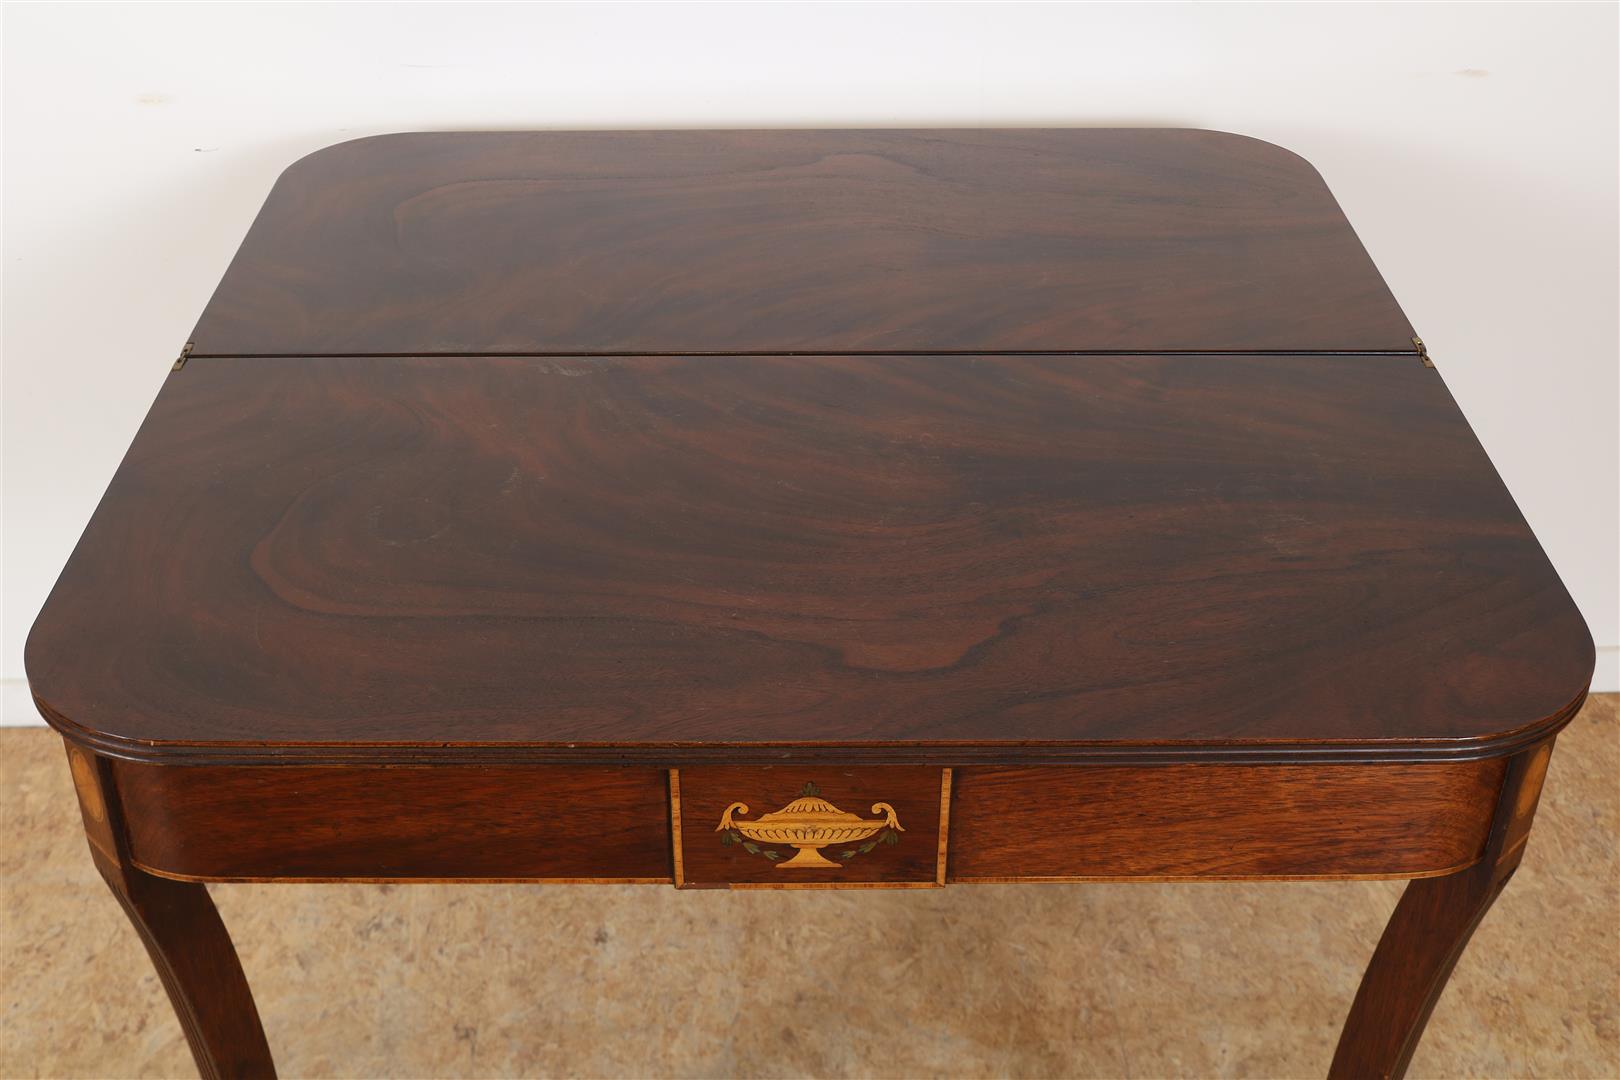 Mahogany Georgian-style coffee/breakfast table with folding top, inlaid vase in skirting boards - Image 2 of 6